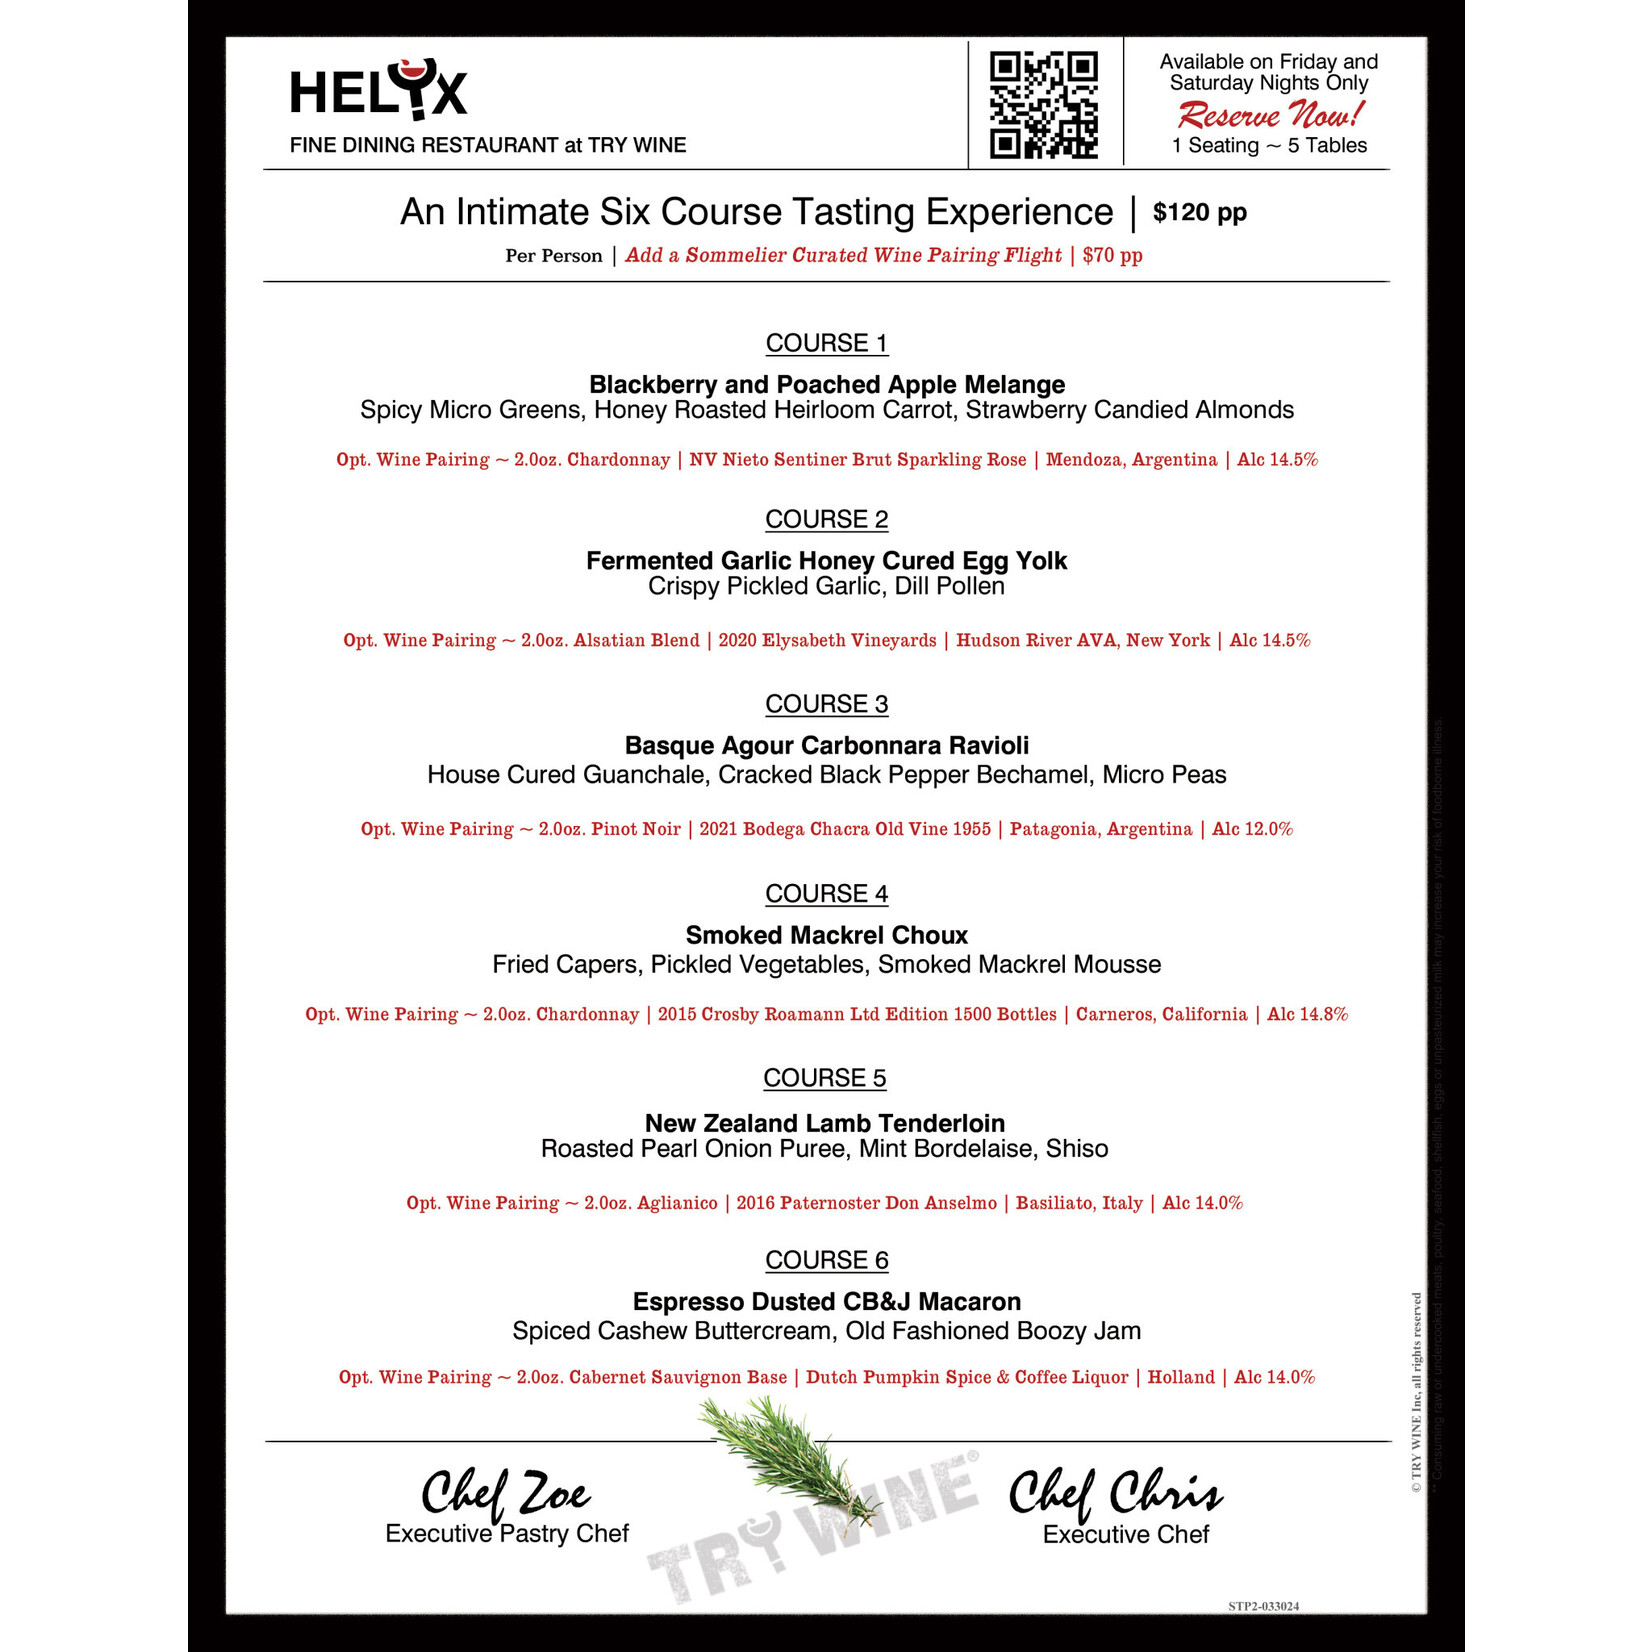 NEW ~ HELYX Restaurant 6 Course Tasting Experience ~ Friday May 17th at 7:30pm ~ per person